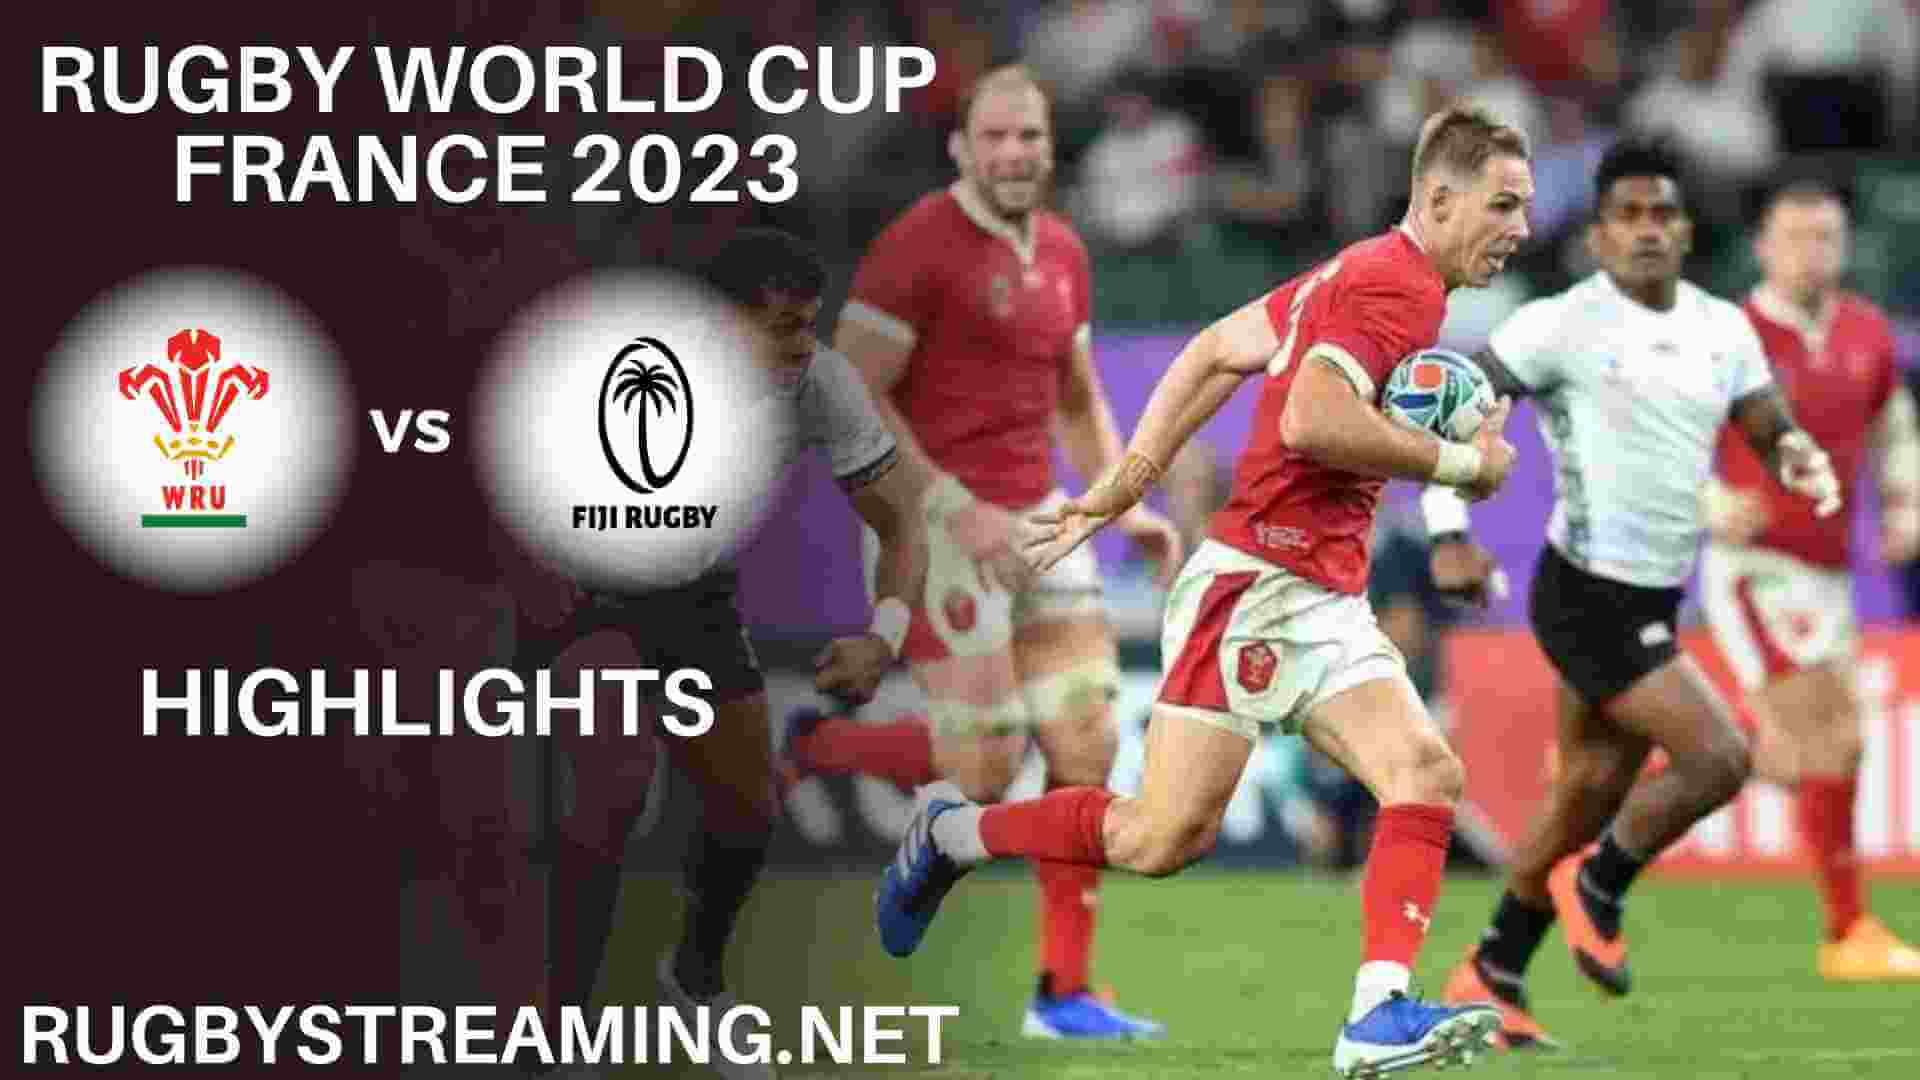 Wales Vs Fiji Highlights Rugby World Cup 2023